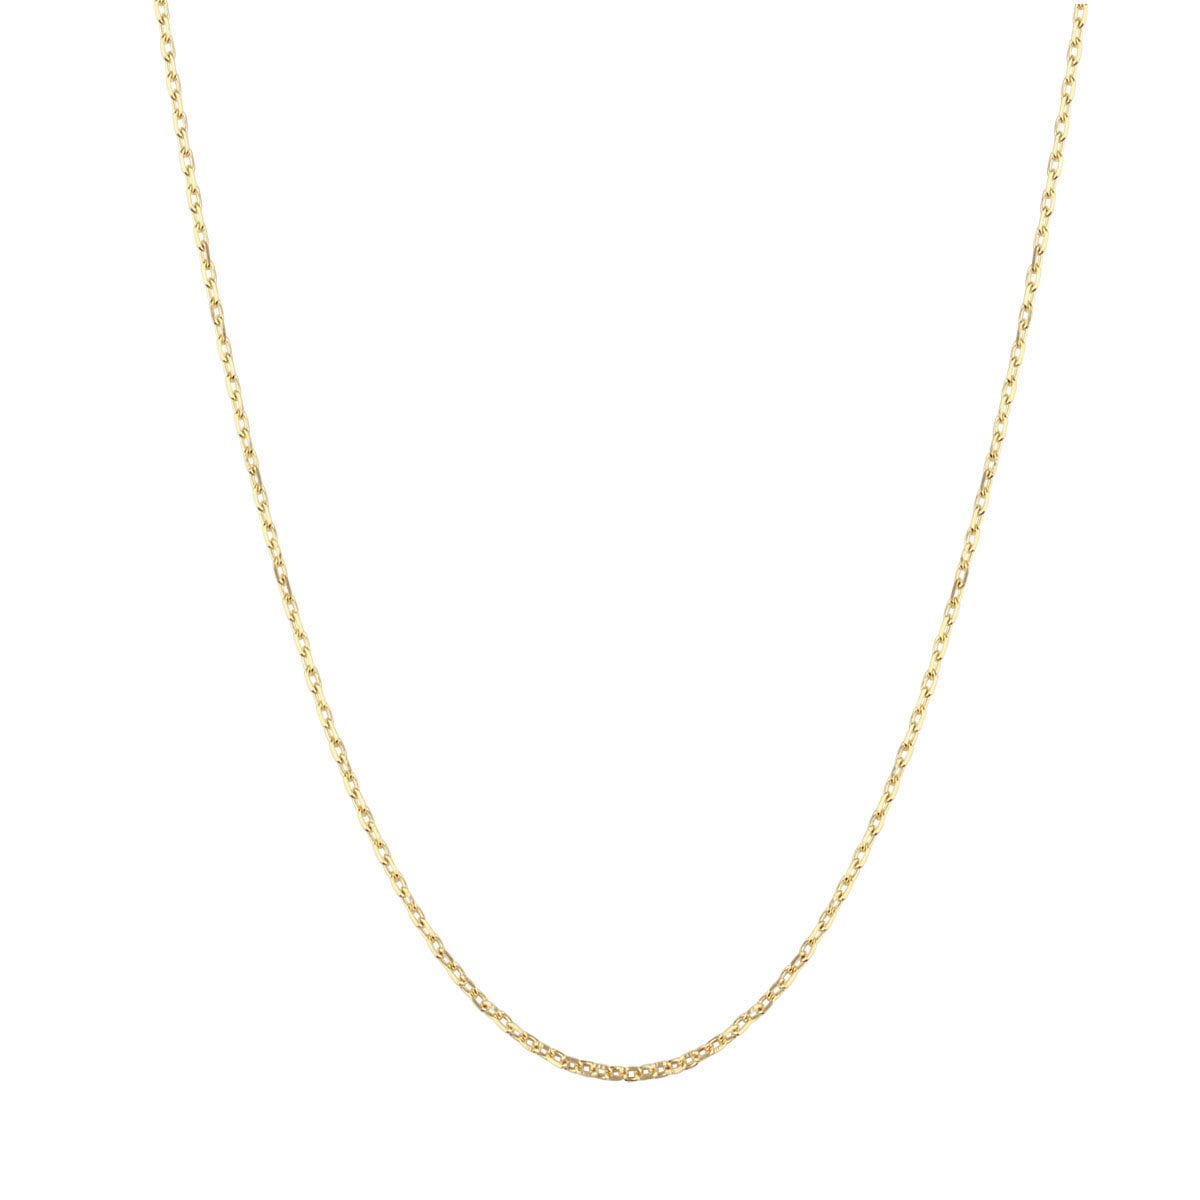 18ct Yellow Gold 17inch Cable Chain Necklace